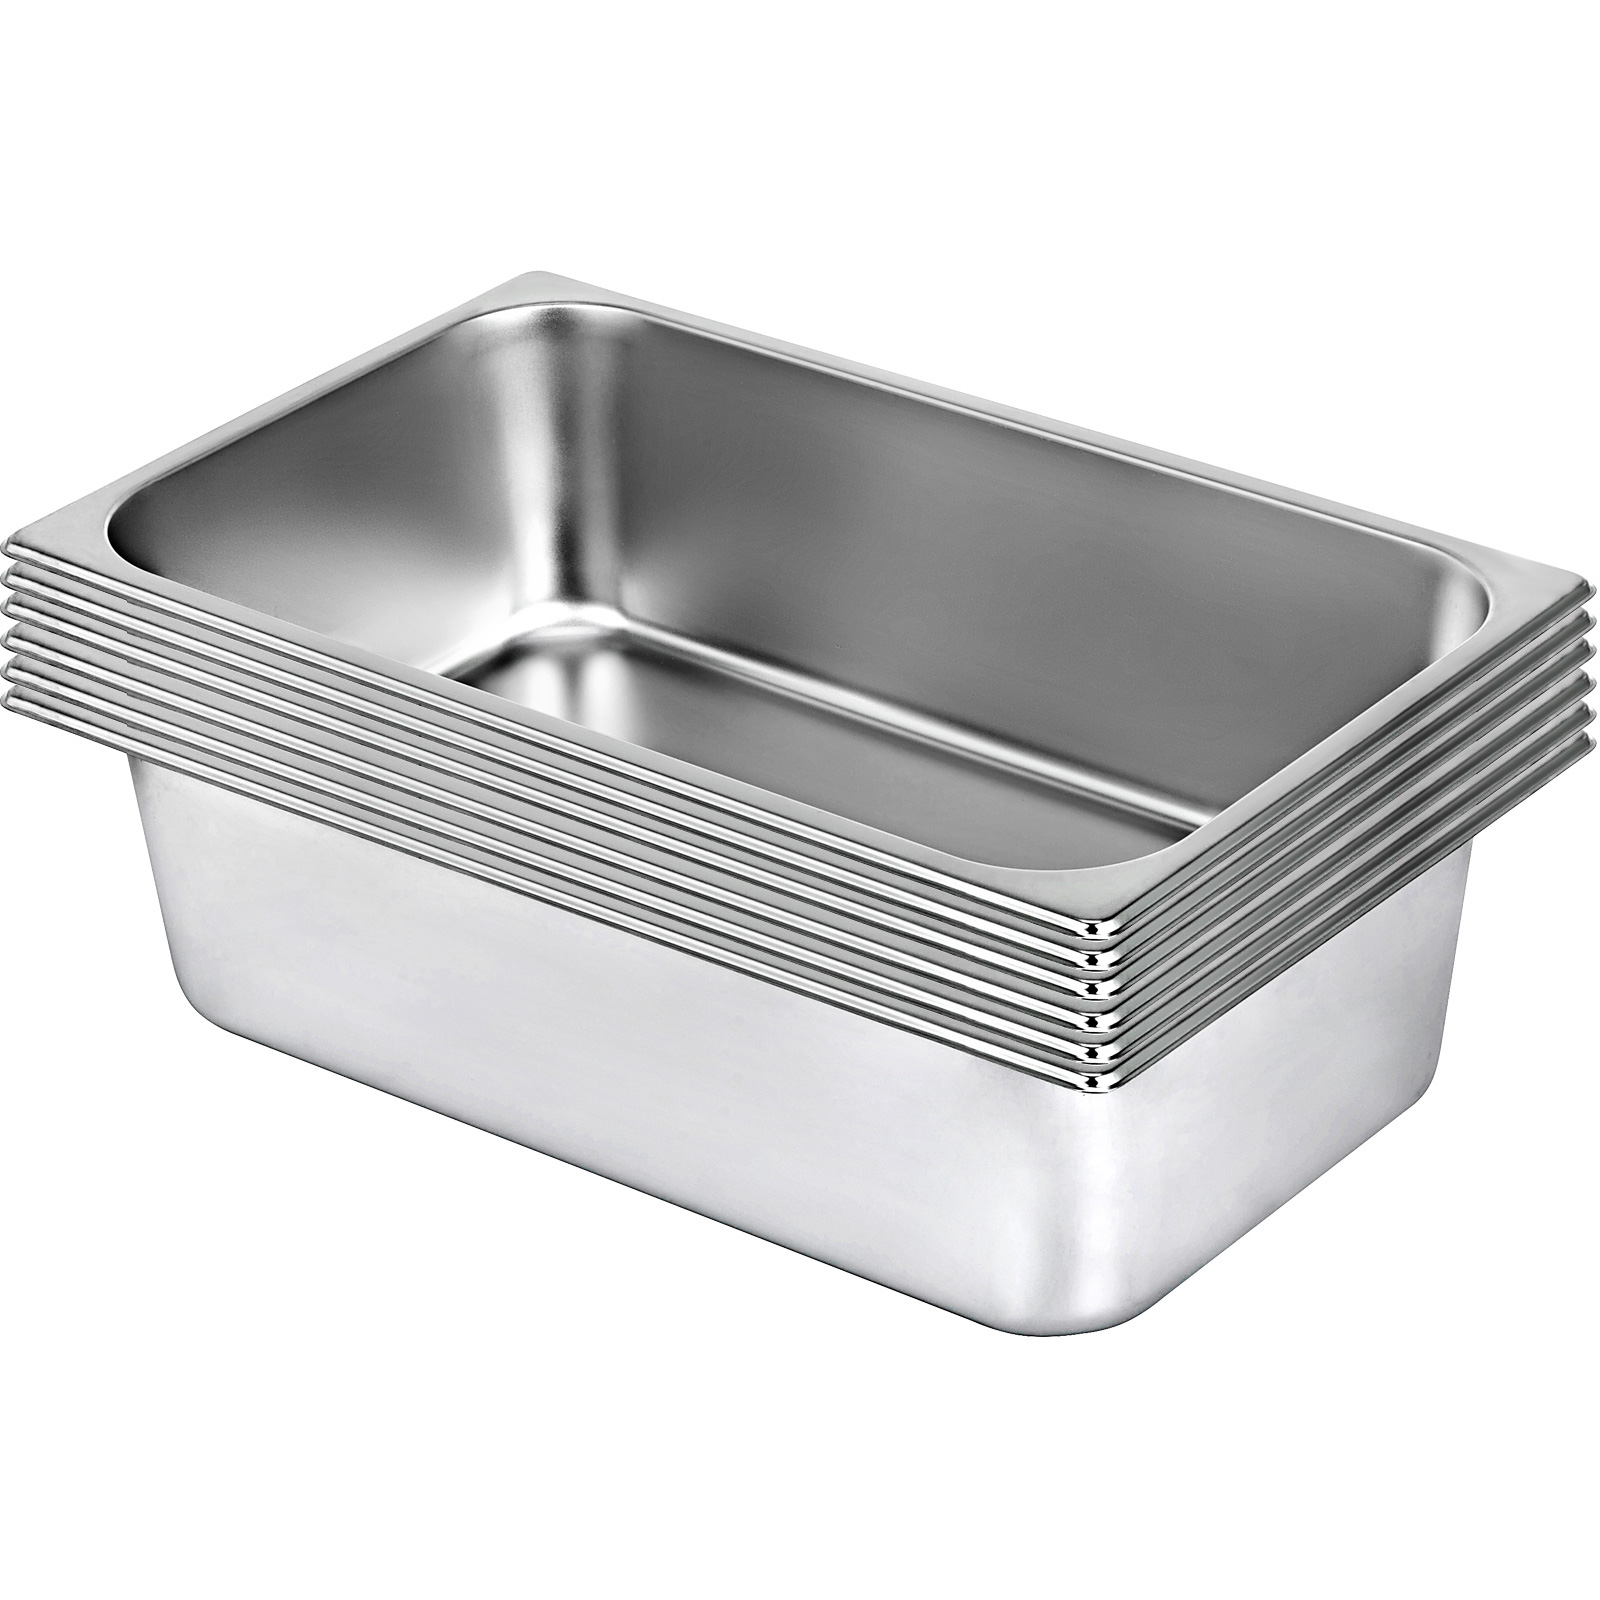 2"4" 6" Deep Full Size Stainless Steel Steam Table Pans 1/1 Size Hotel Full Size Stainless Steel Steam Table Pans